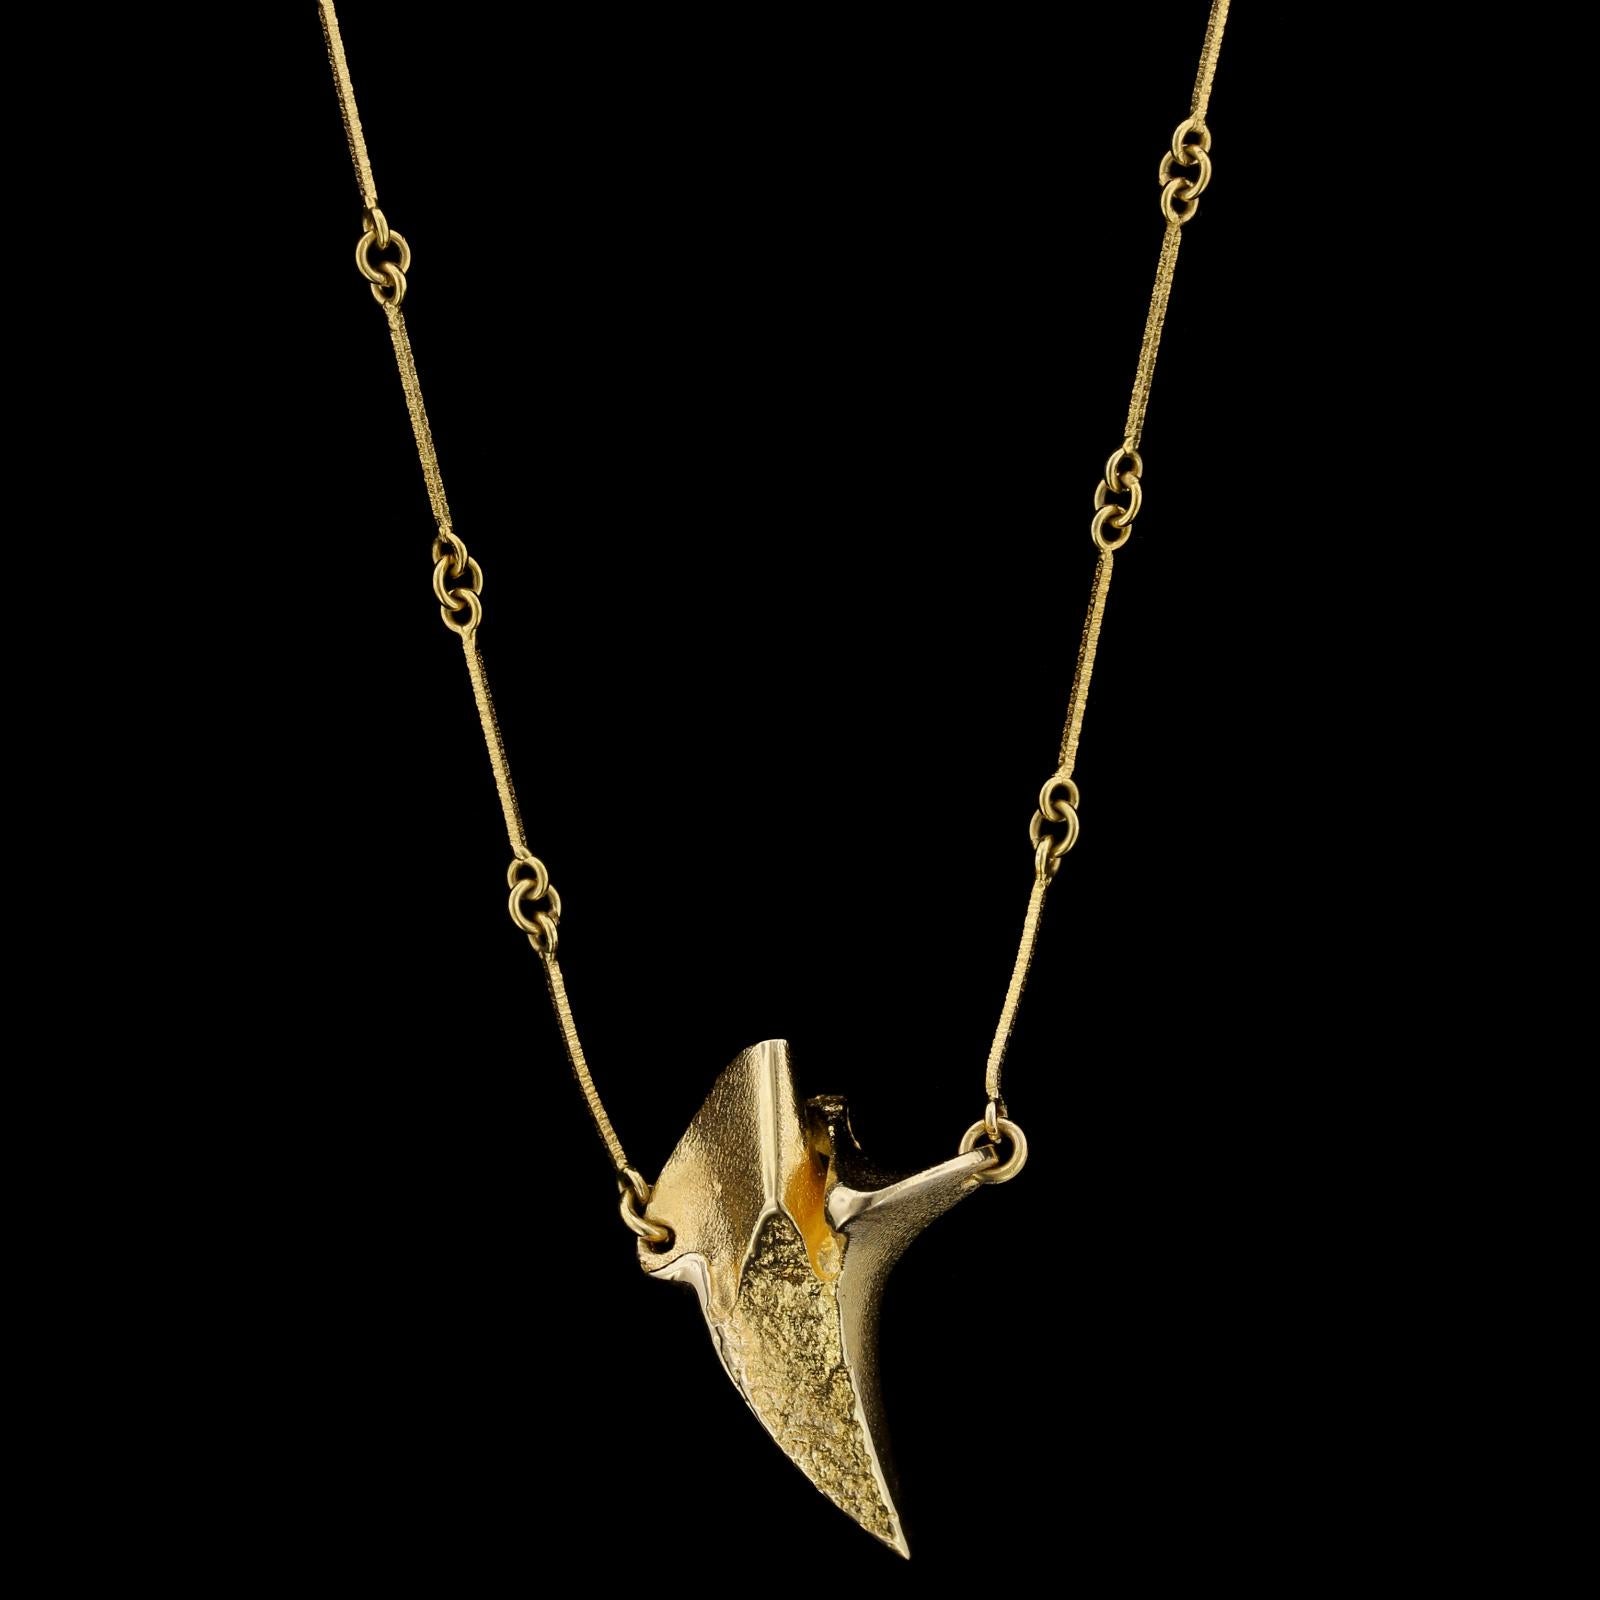 Lapponia 18K Yellow Gold Necklace, Finland. The abstract pendant is completed
by textured bar links, length 17